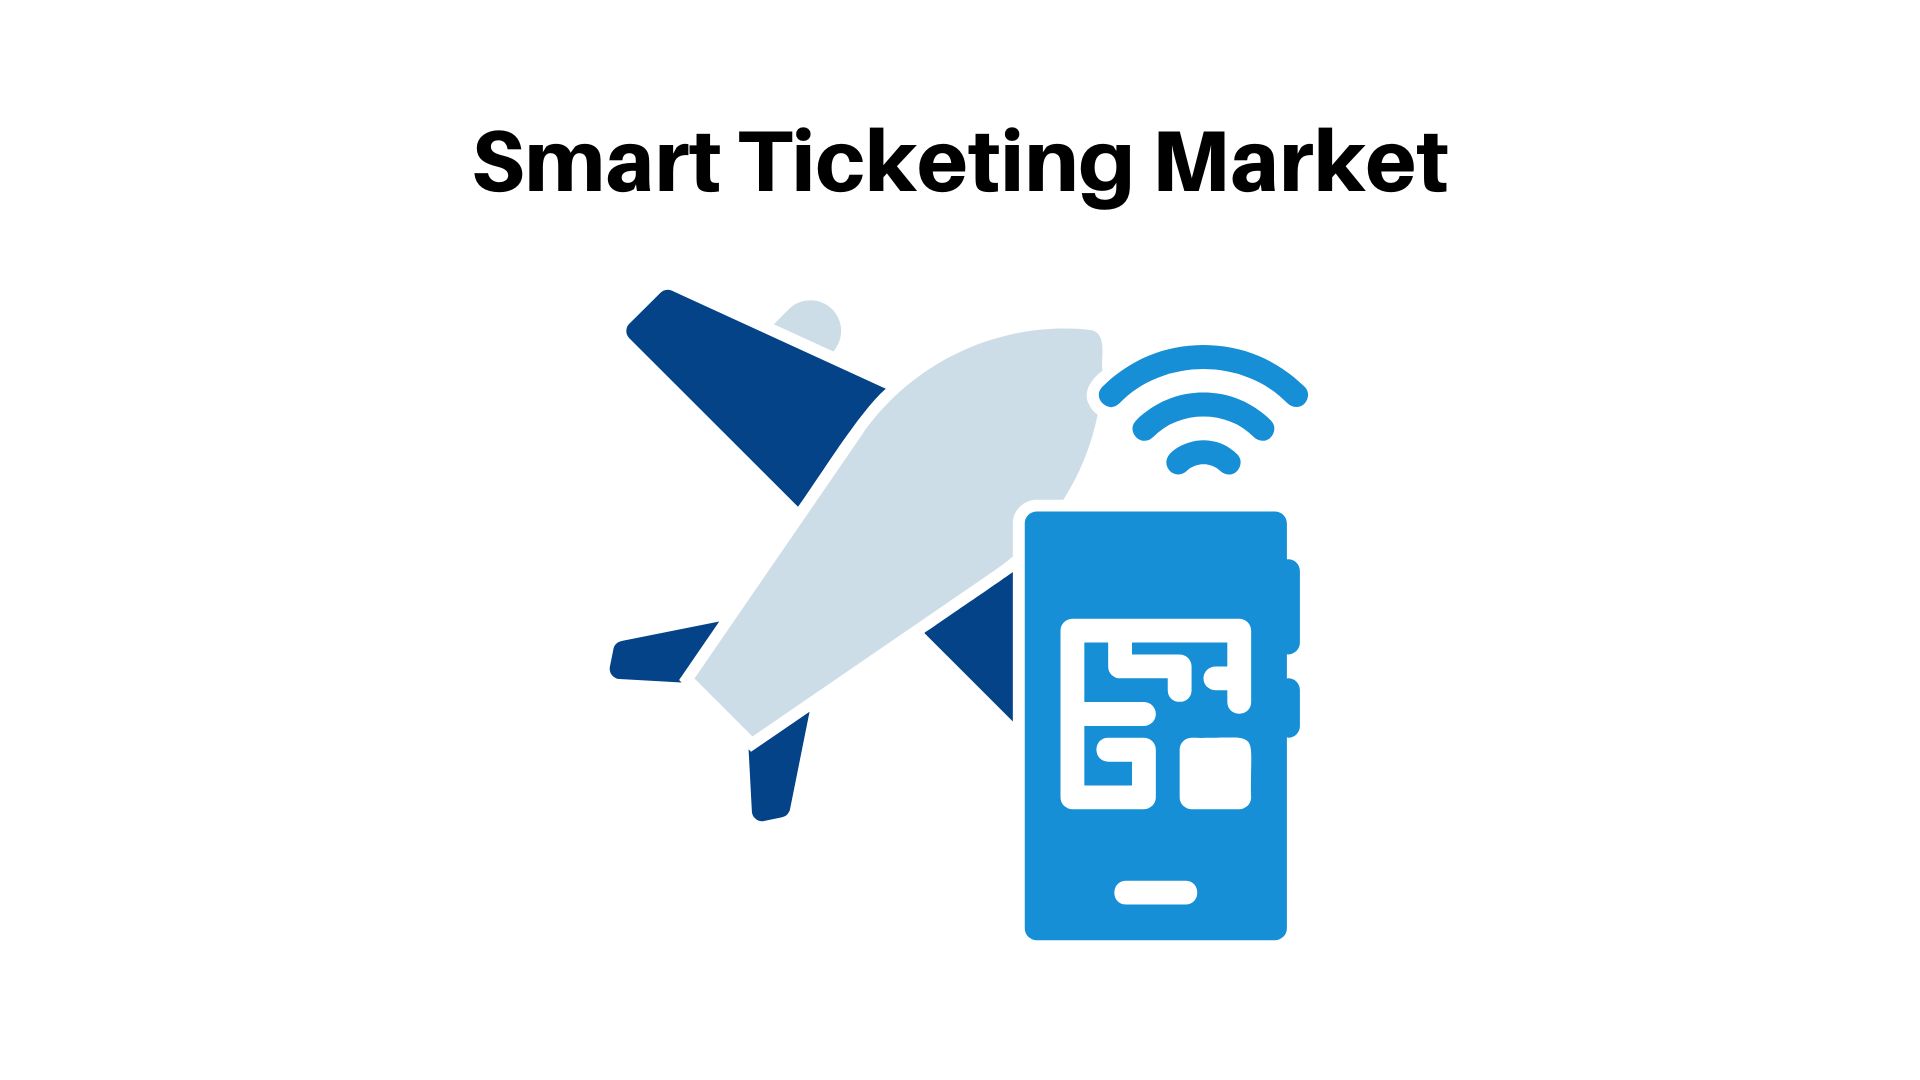 Smart Ticketing Market to Grow at a CAGR of 14.5% from 2022 to 2032, with an Initial Value 10.37